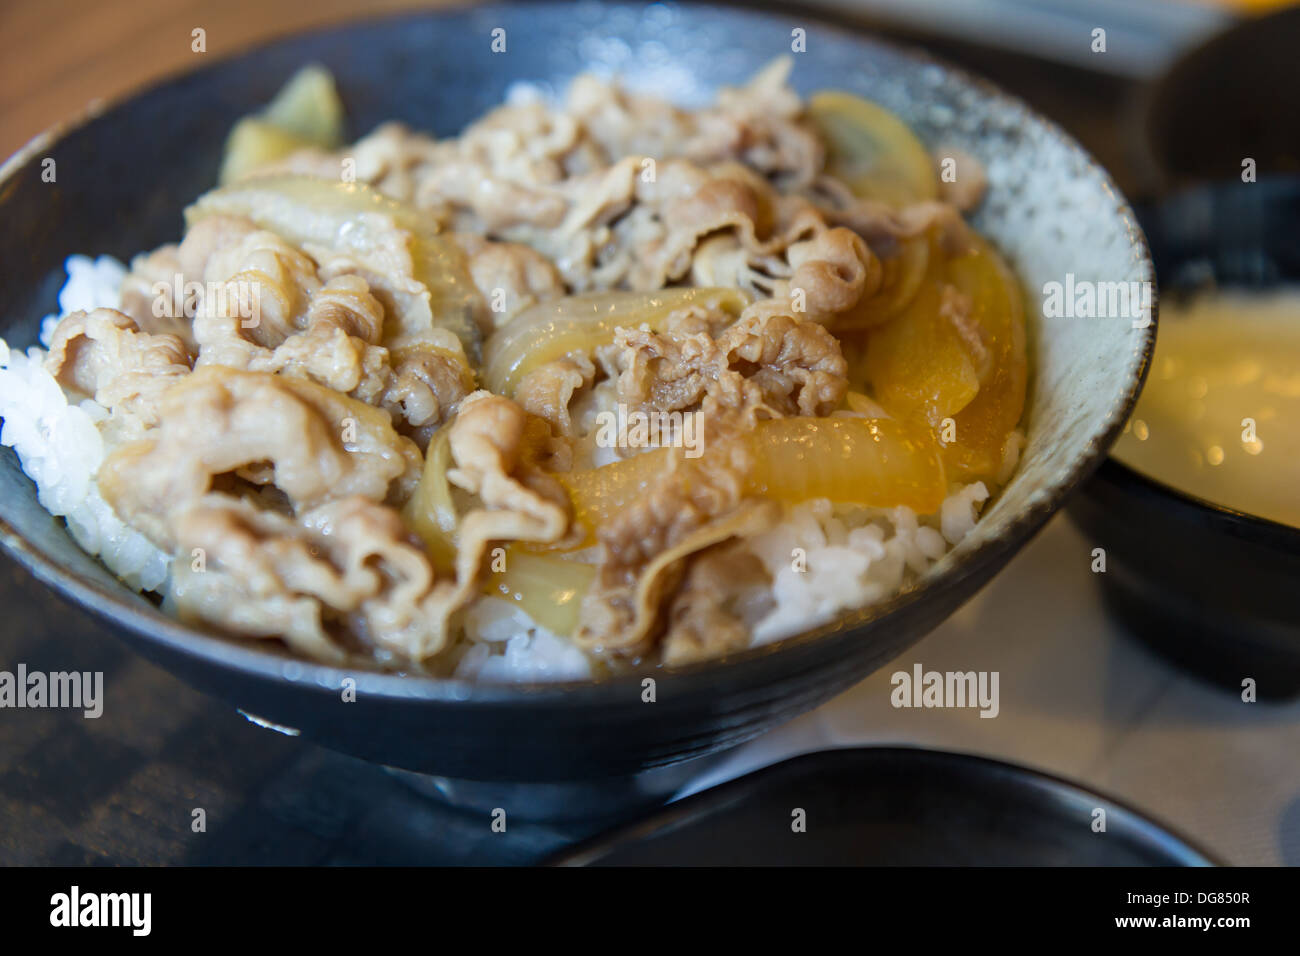 Japanese pork and rice in a black bowl Stock Photo